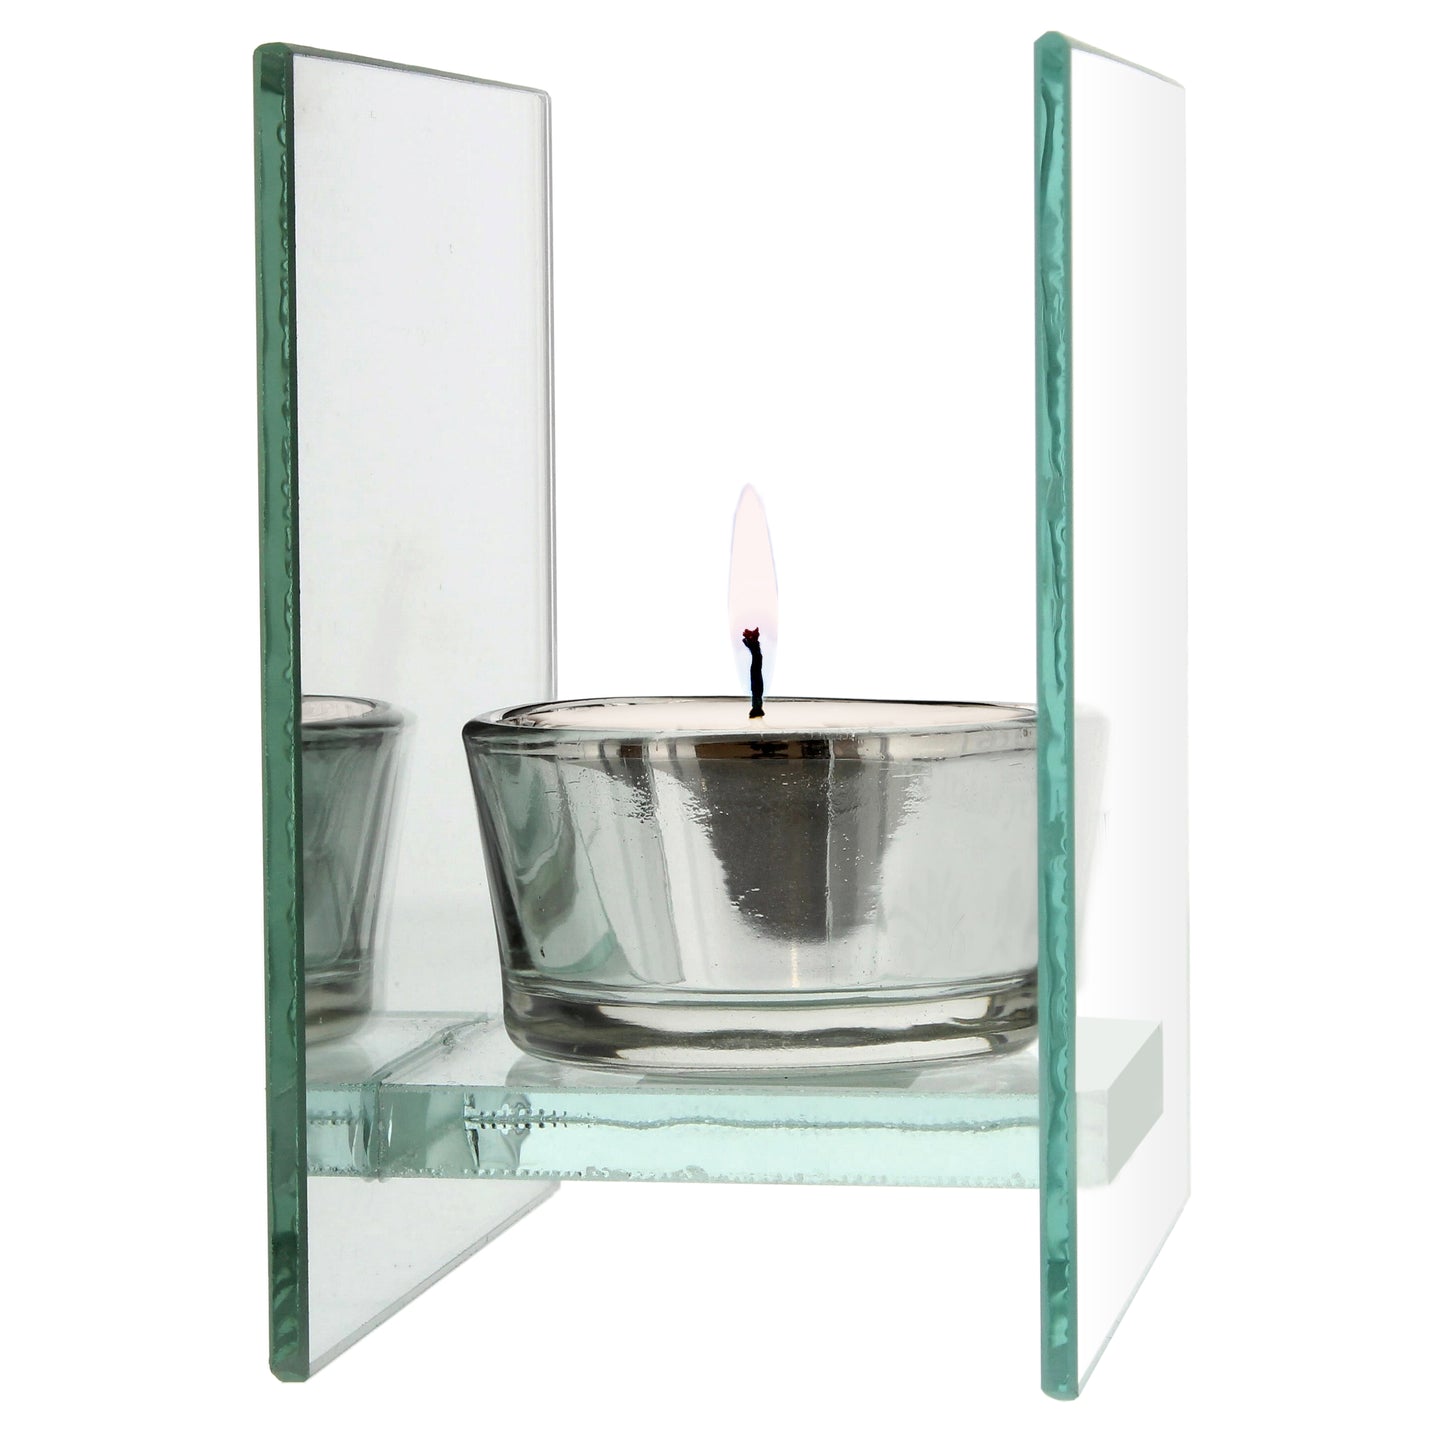 Personalised Soft Watercolour Mirrored Glass Tea Light Candle Holder - Personalise It!